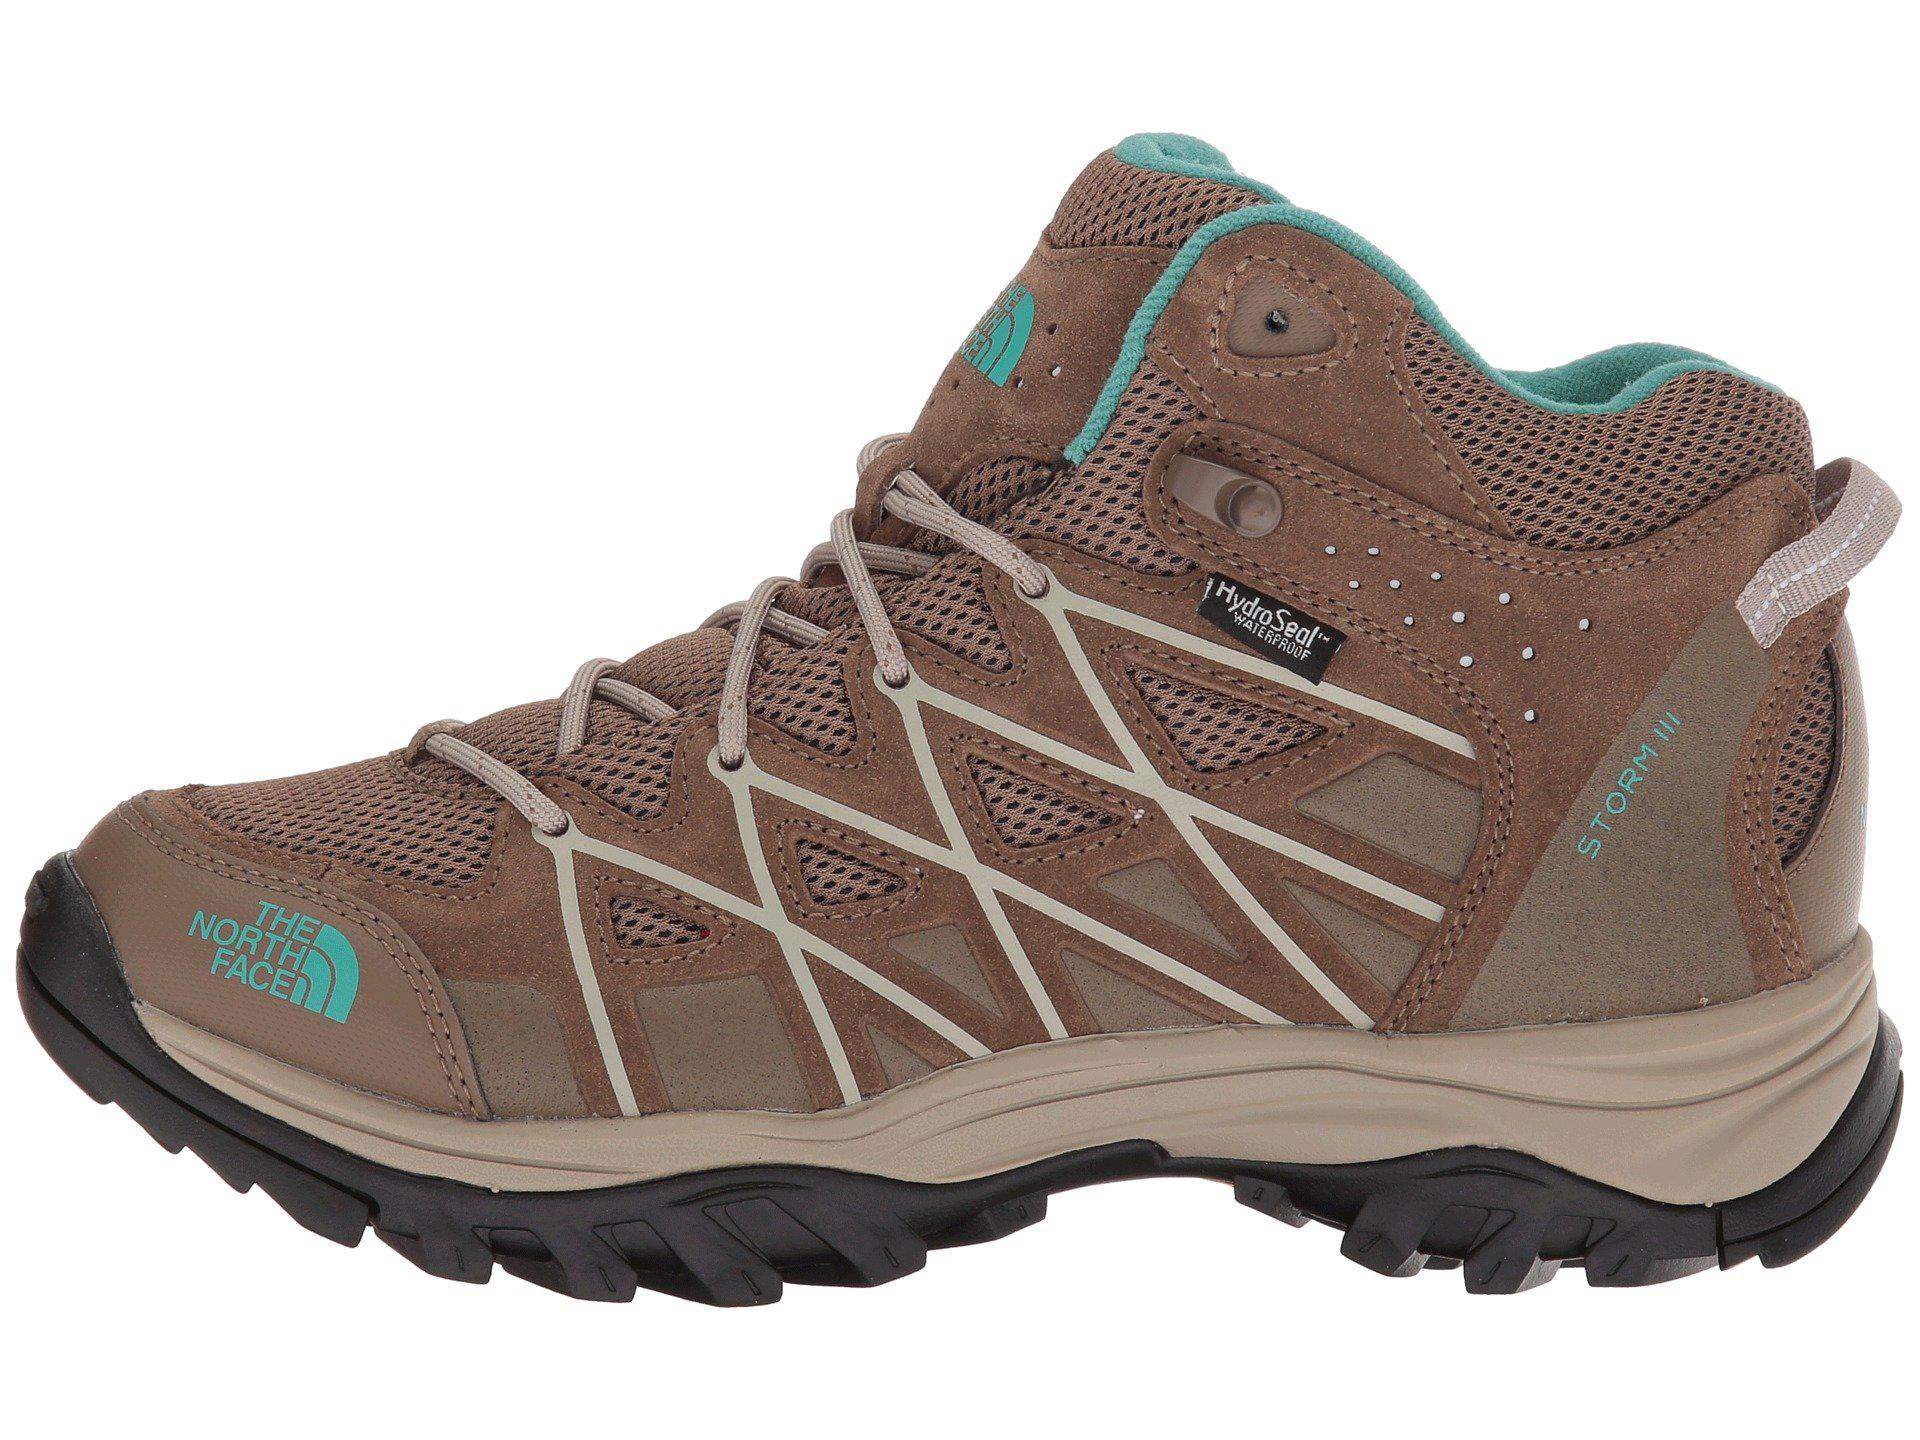 The North Face Women's Storm Iii Mid Waterproof Hiking Boots Online, SAVE  57% - aveclumiere.com